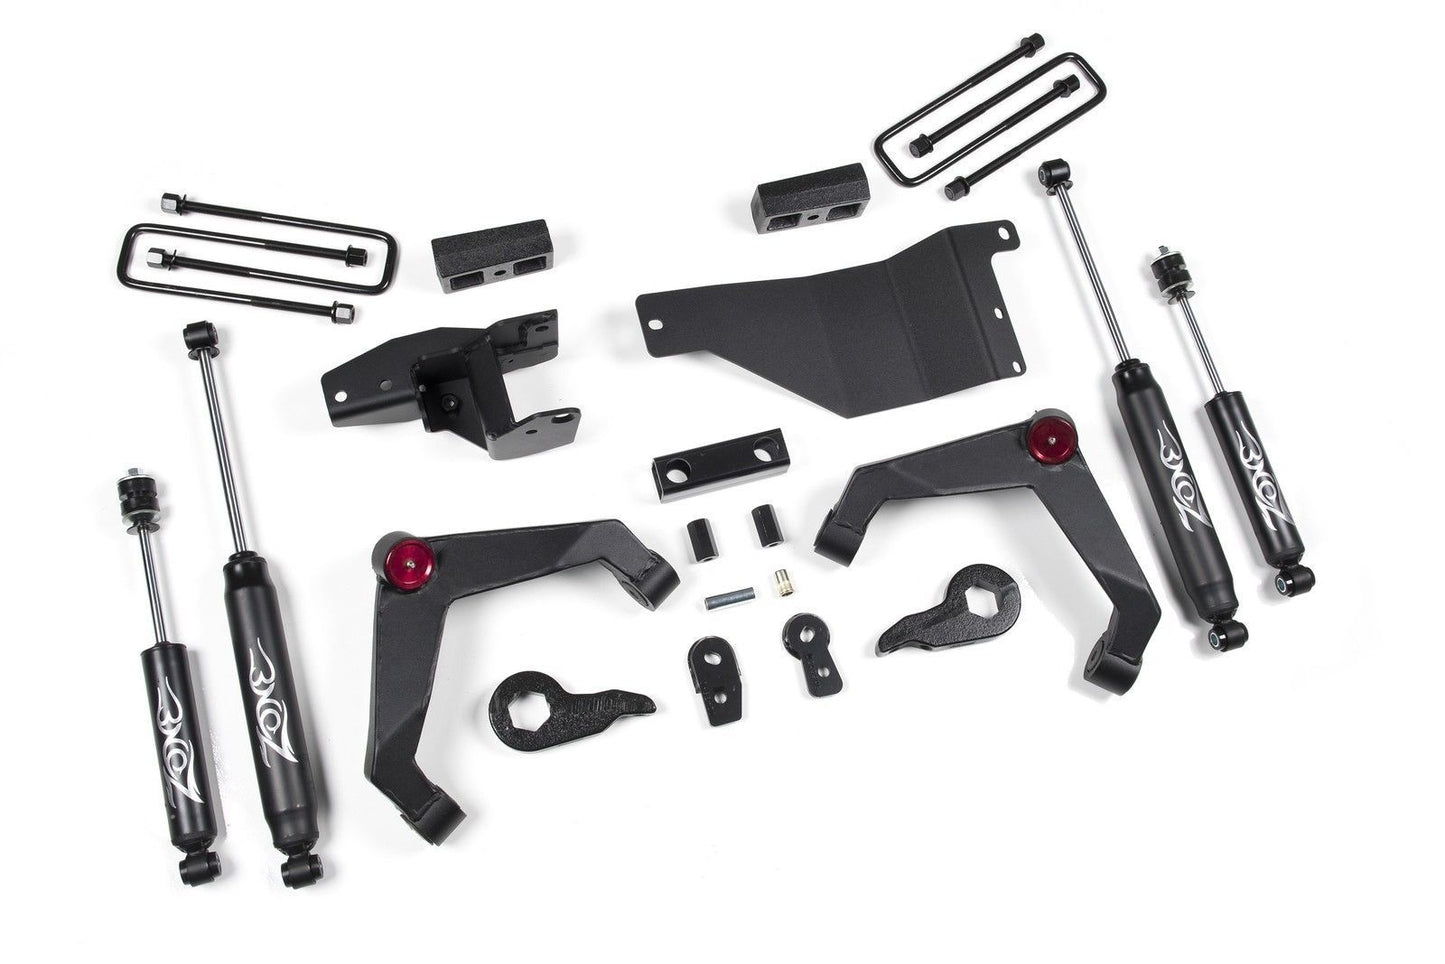 Zone Offroad Adventure Series Lift kit for Chevy GMC 2500/3500 Pickup 3" 01-10